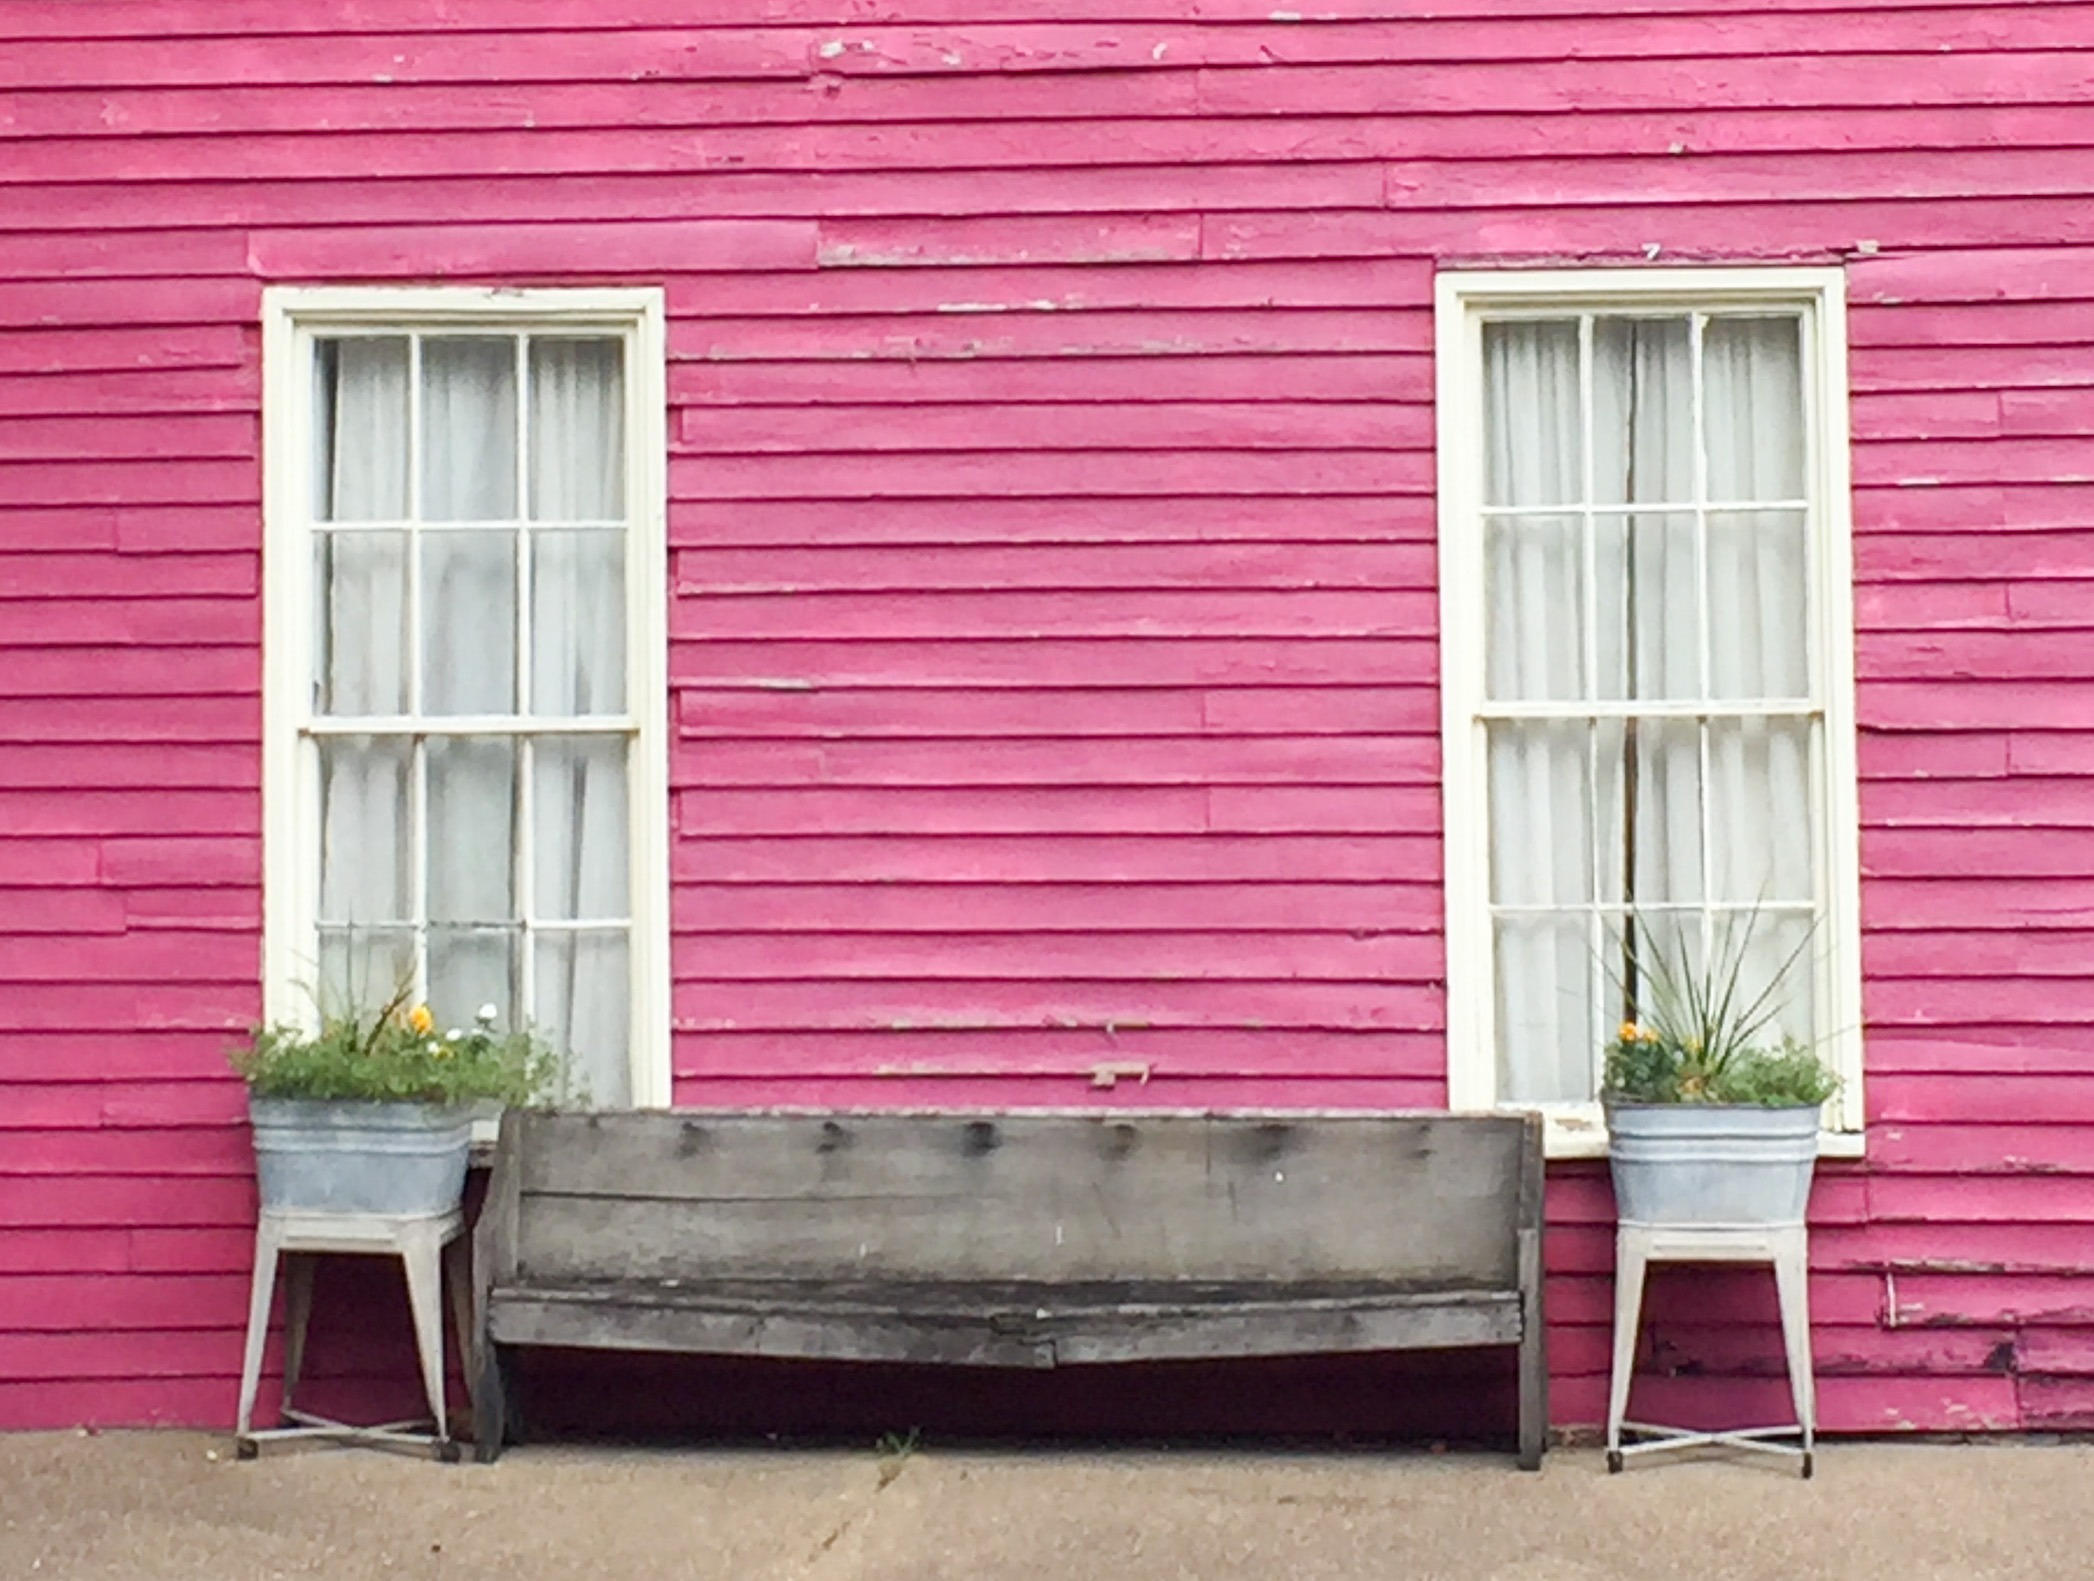 Pink house with bench